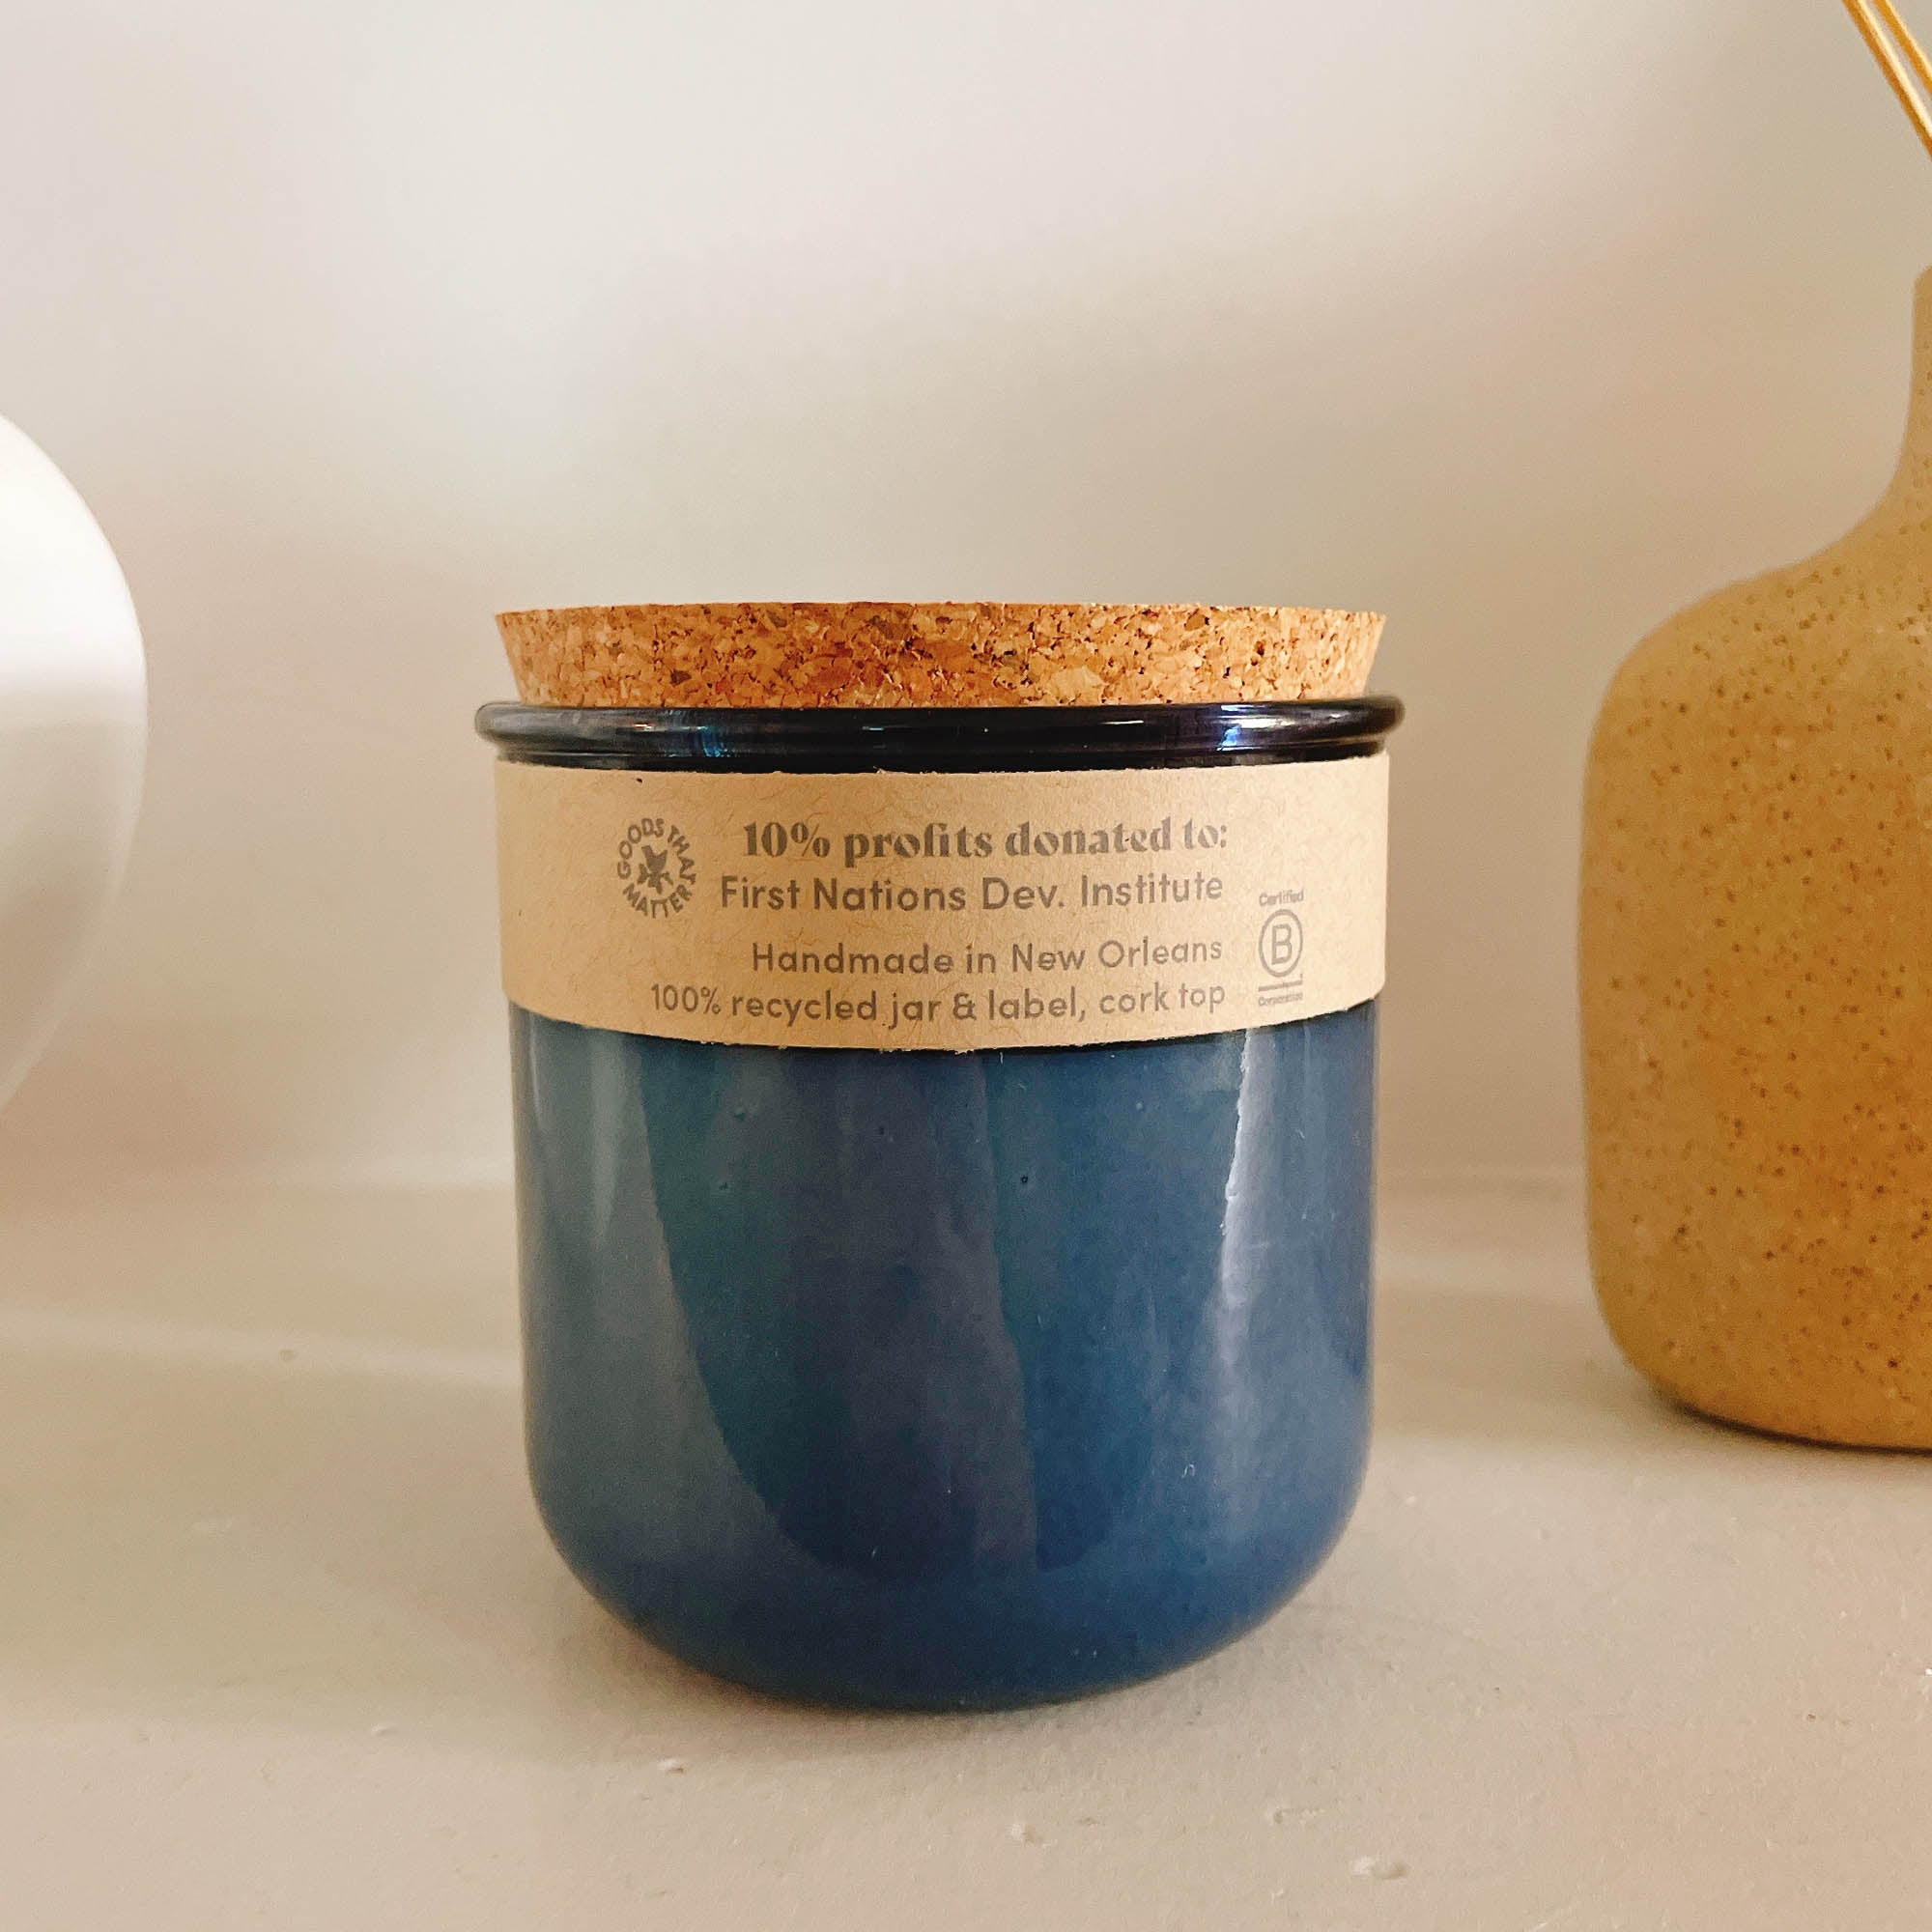 Saffron + Tobacco, Gives to First Nations Development Institute - Cork Top & Blue Recycled Glass Jar